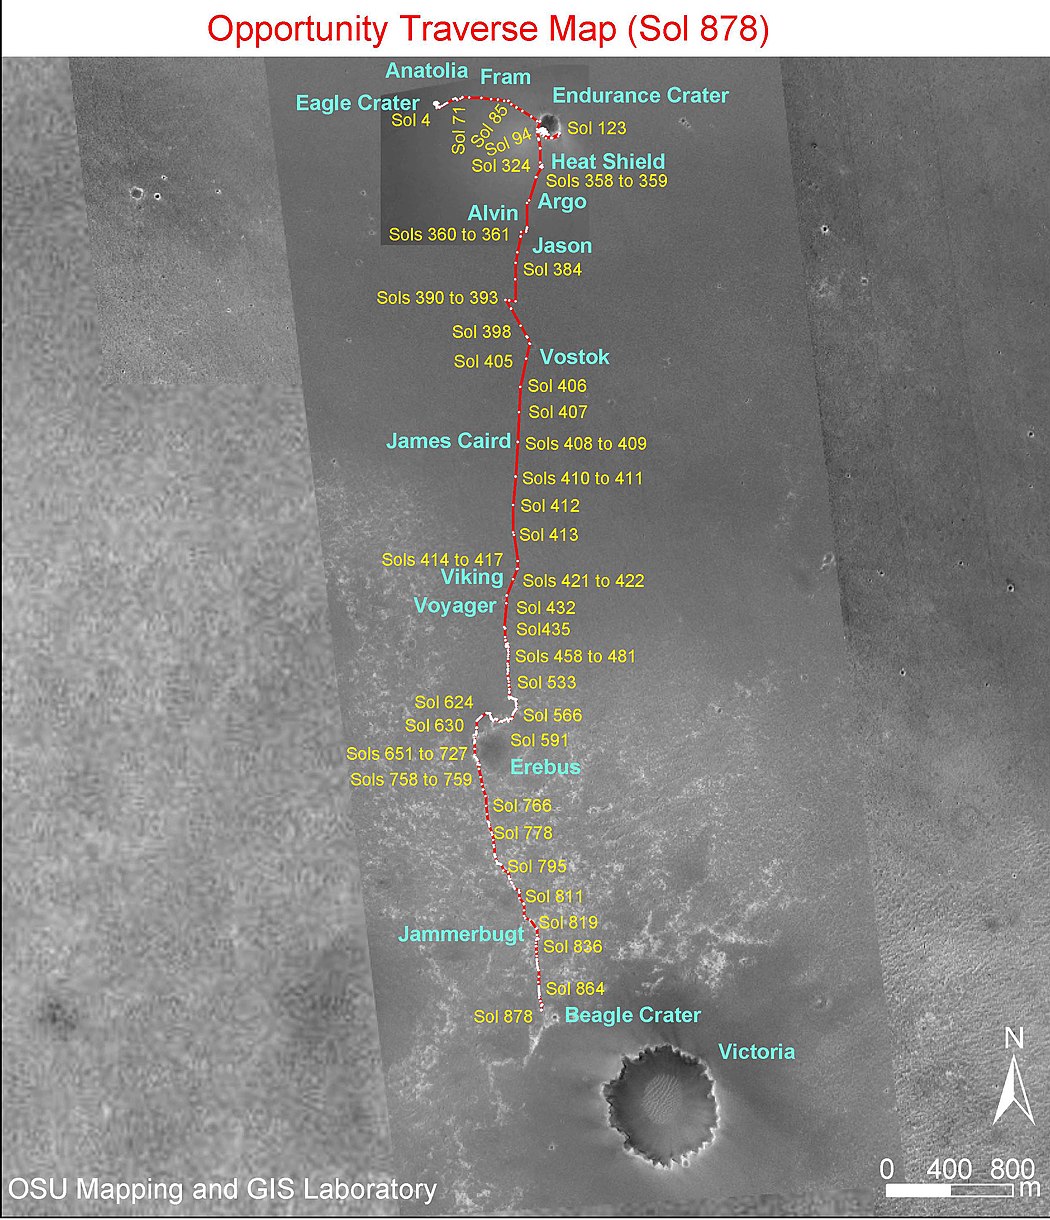 The rover's journey up to Sol 878 (July 2006) on the way to Victoria crater, showing location of Beagle crater MERB 878.jpg